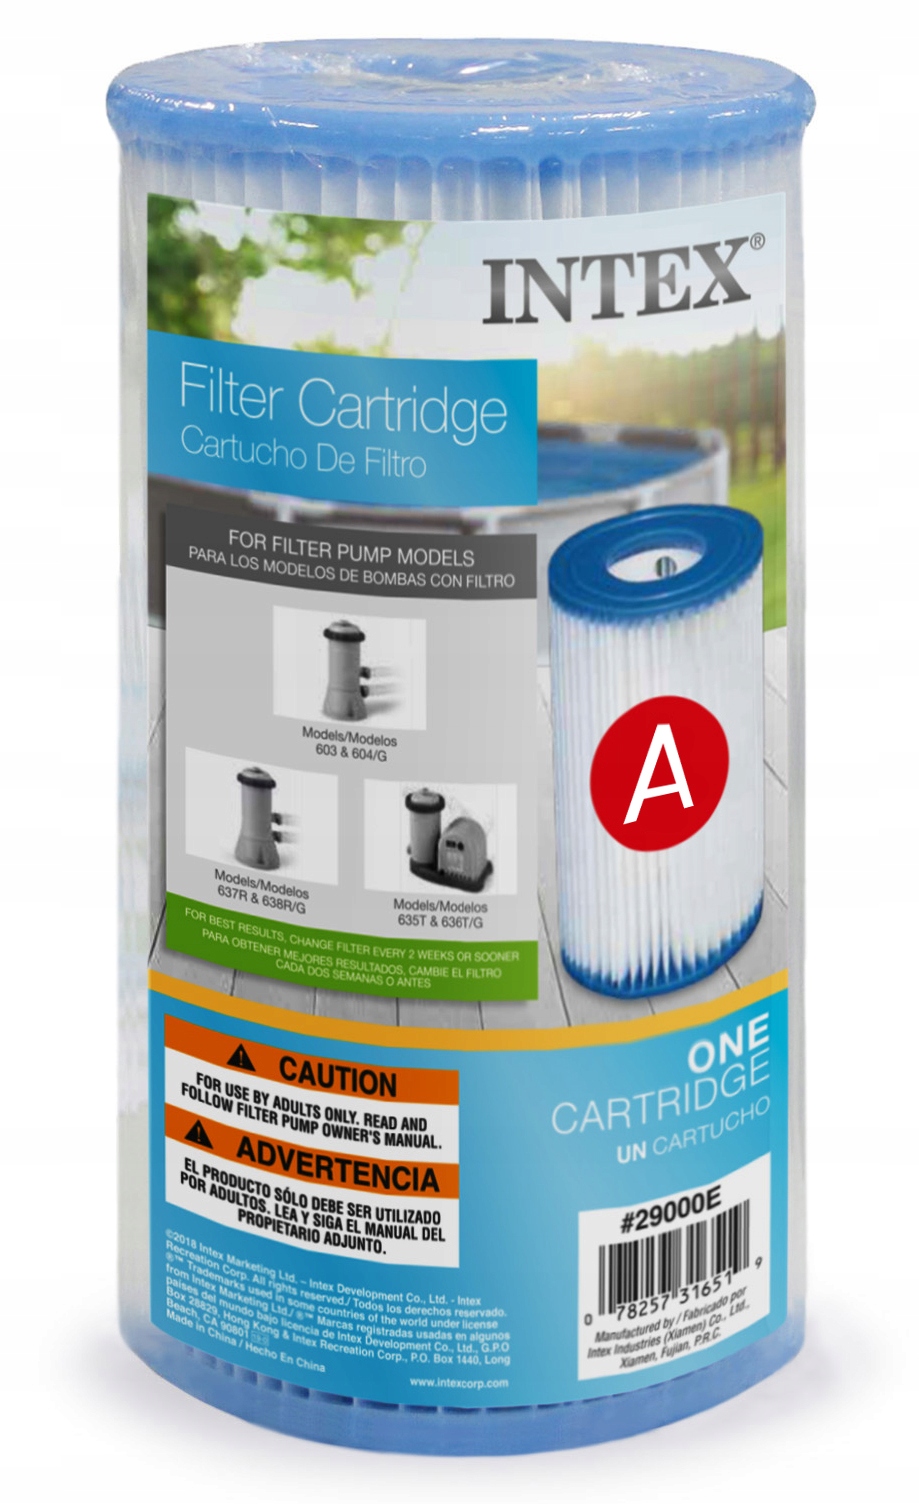 Garbage can Dynamics Virus FILTR PAPIEROWY DO POMPY BASEN TYP A - INTEX 29000 8793195334 - Allegro.pl